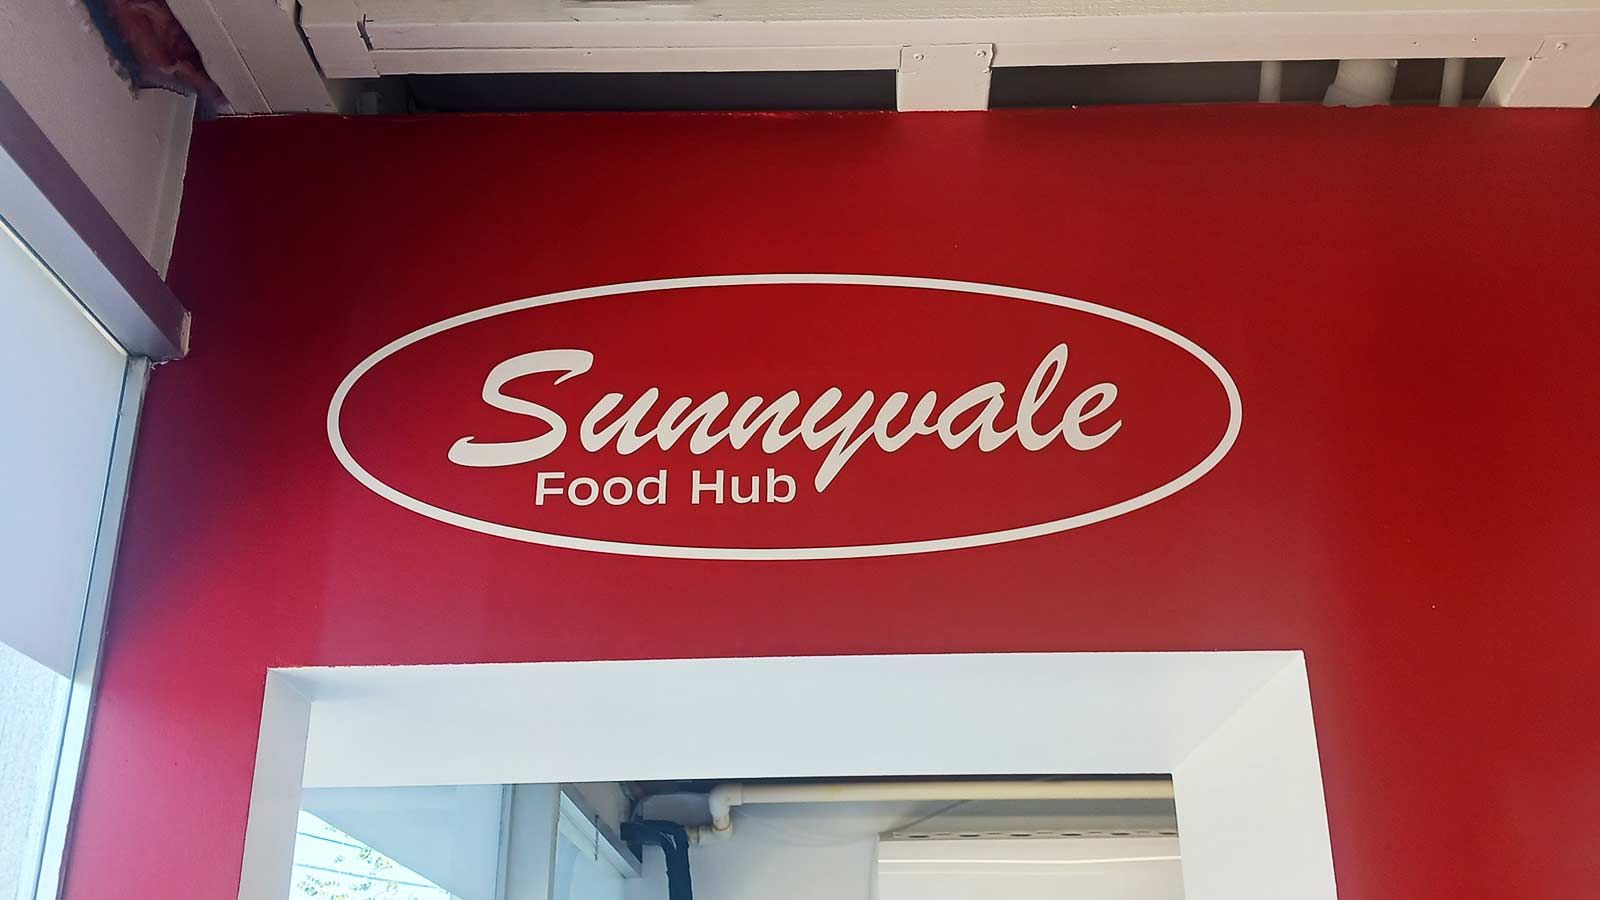 Sunnyvale Food Hub vinyl lettering attached to the wall